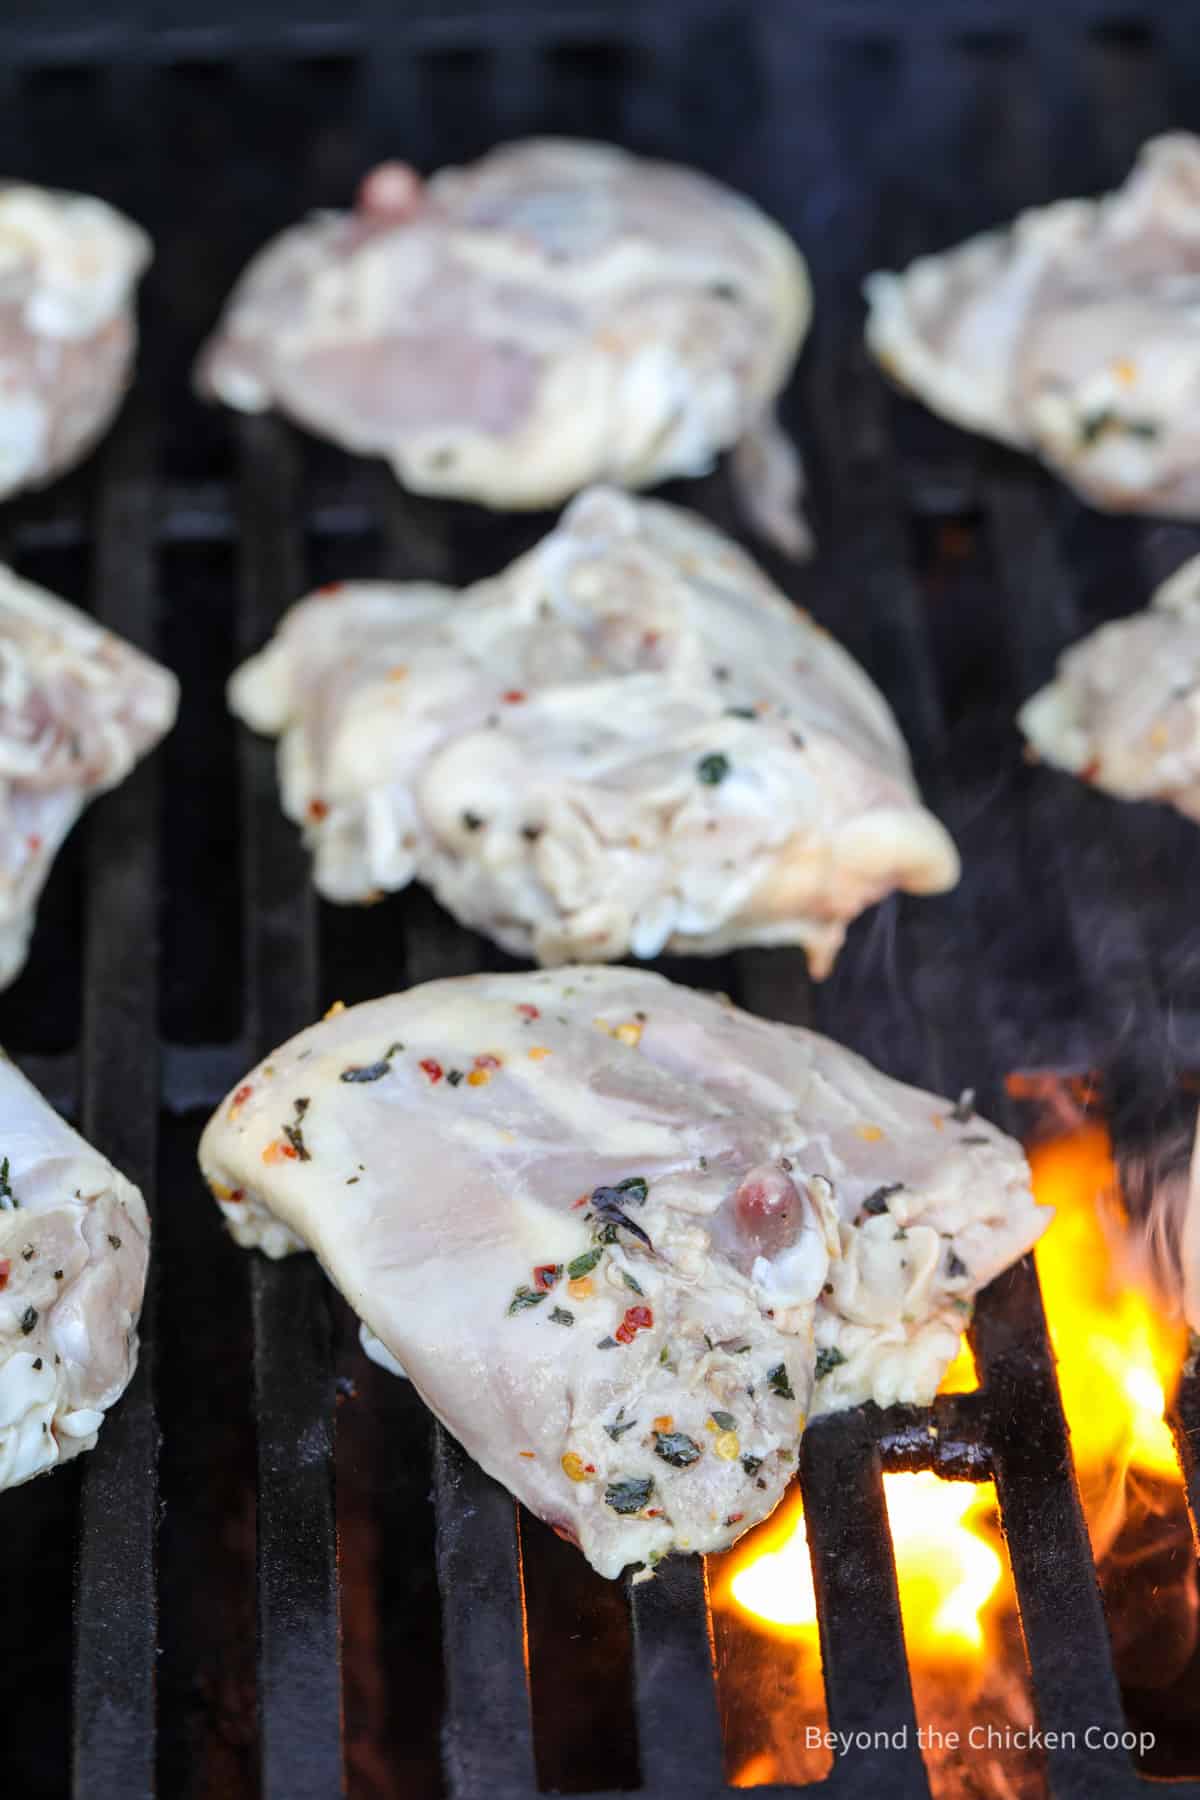 Chicken thighs on a gas grille with a small flame below the chicken.